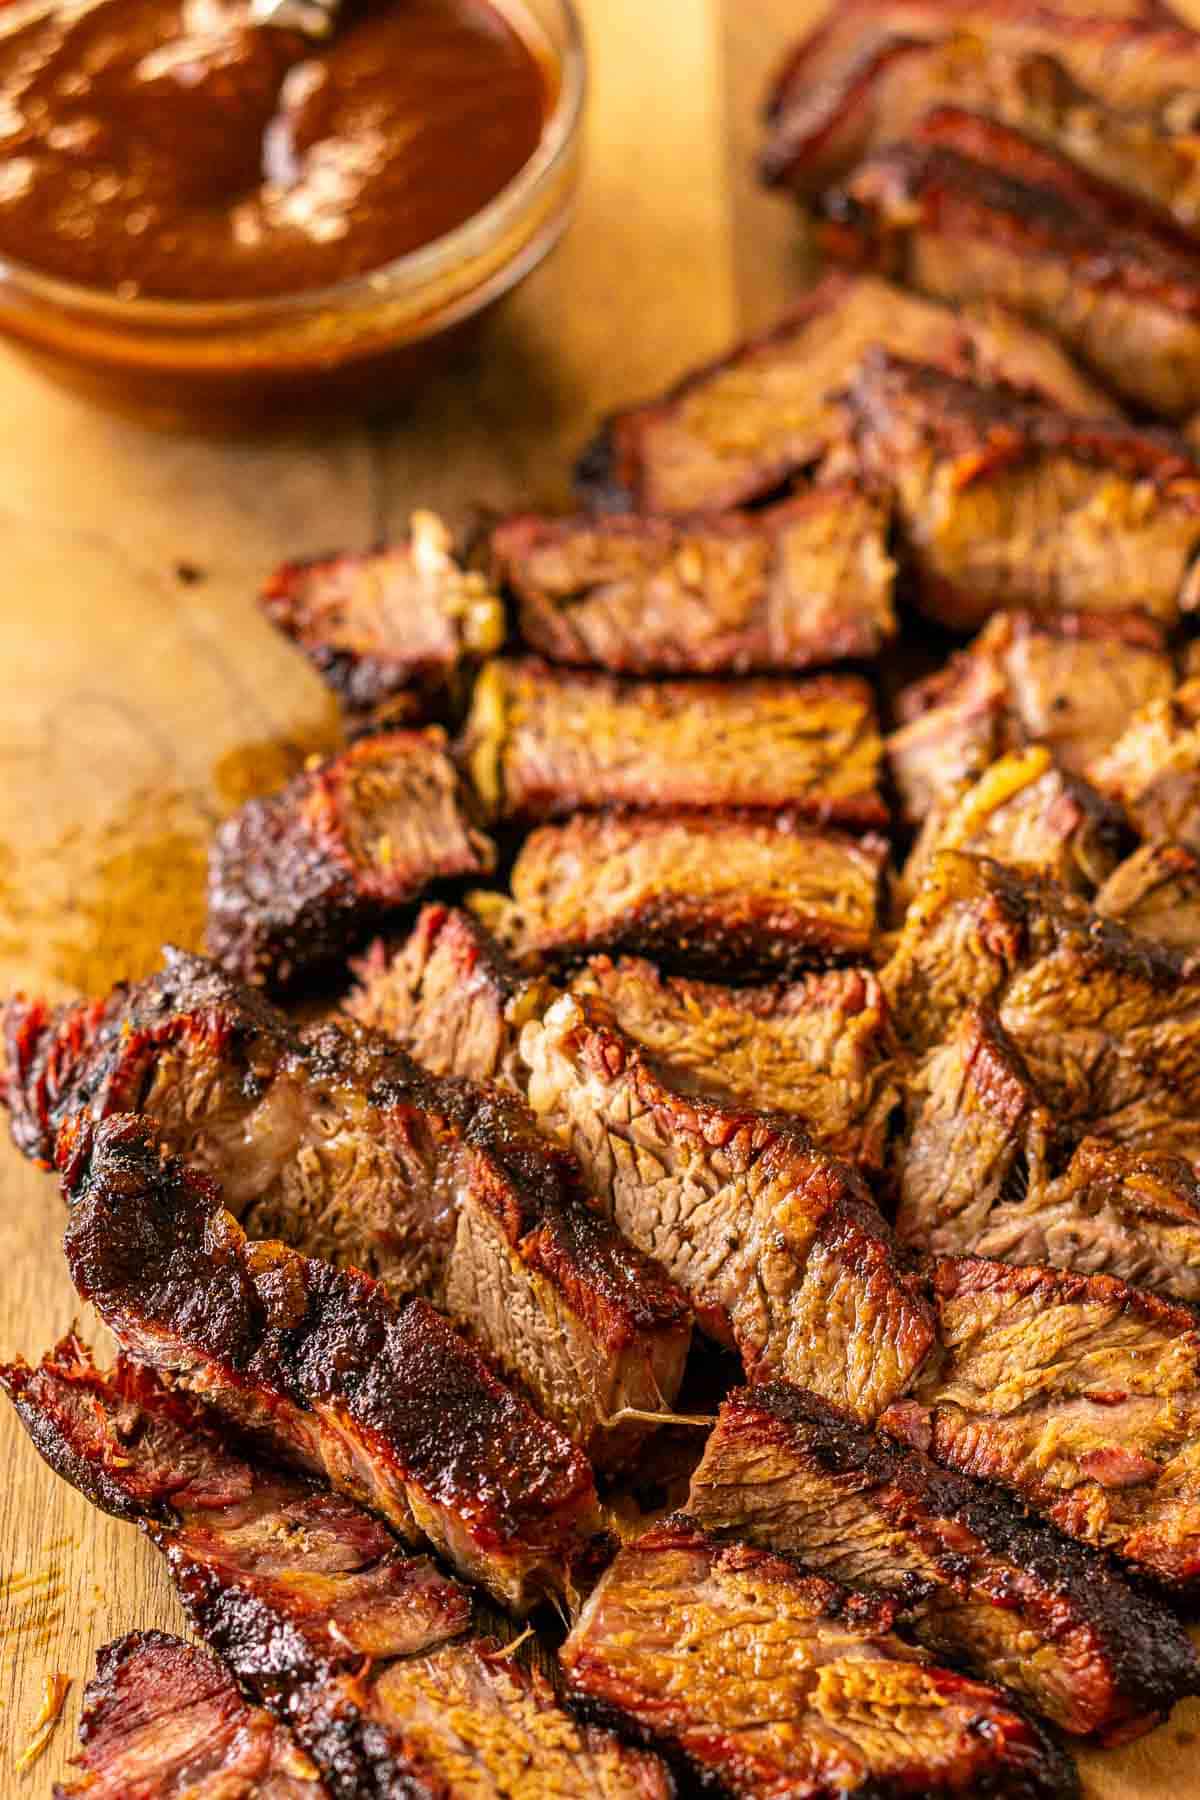 A close-up view of the smoked chuck roast cut into slices on a brown cutting board with a bowl of BBQ sauce in the upper lefthand corner.